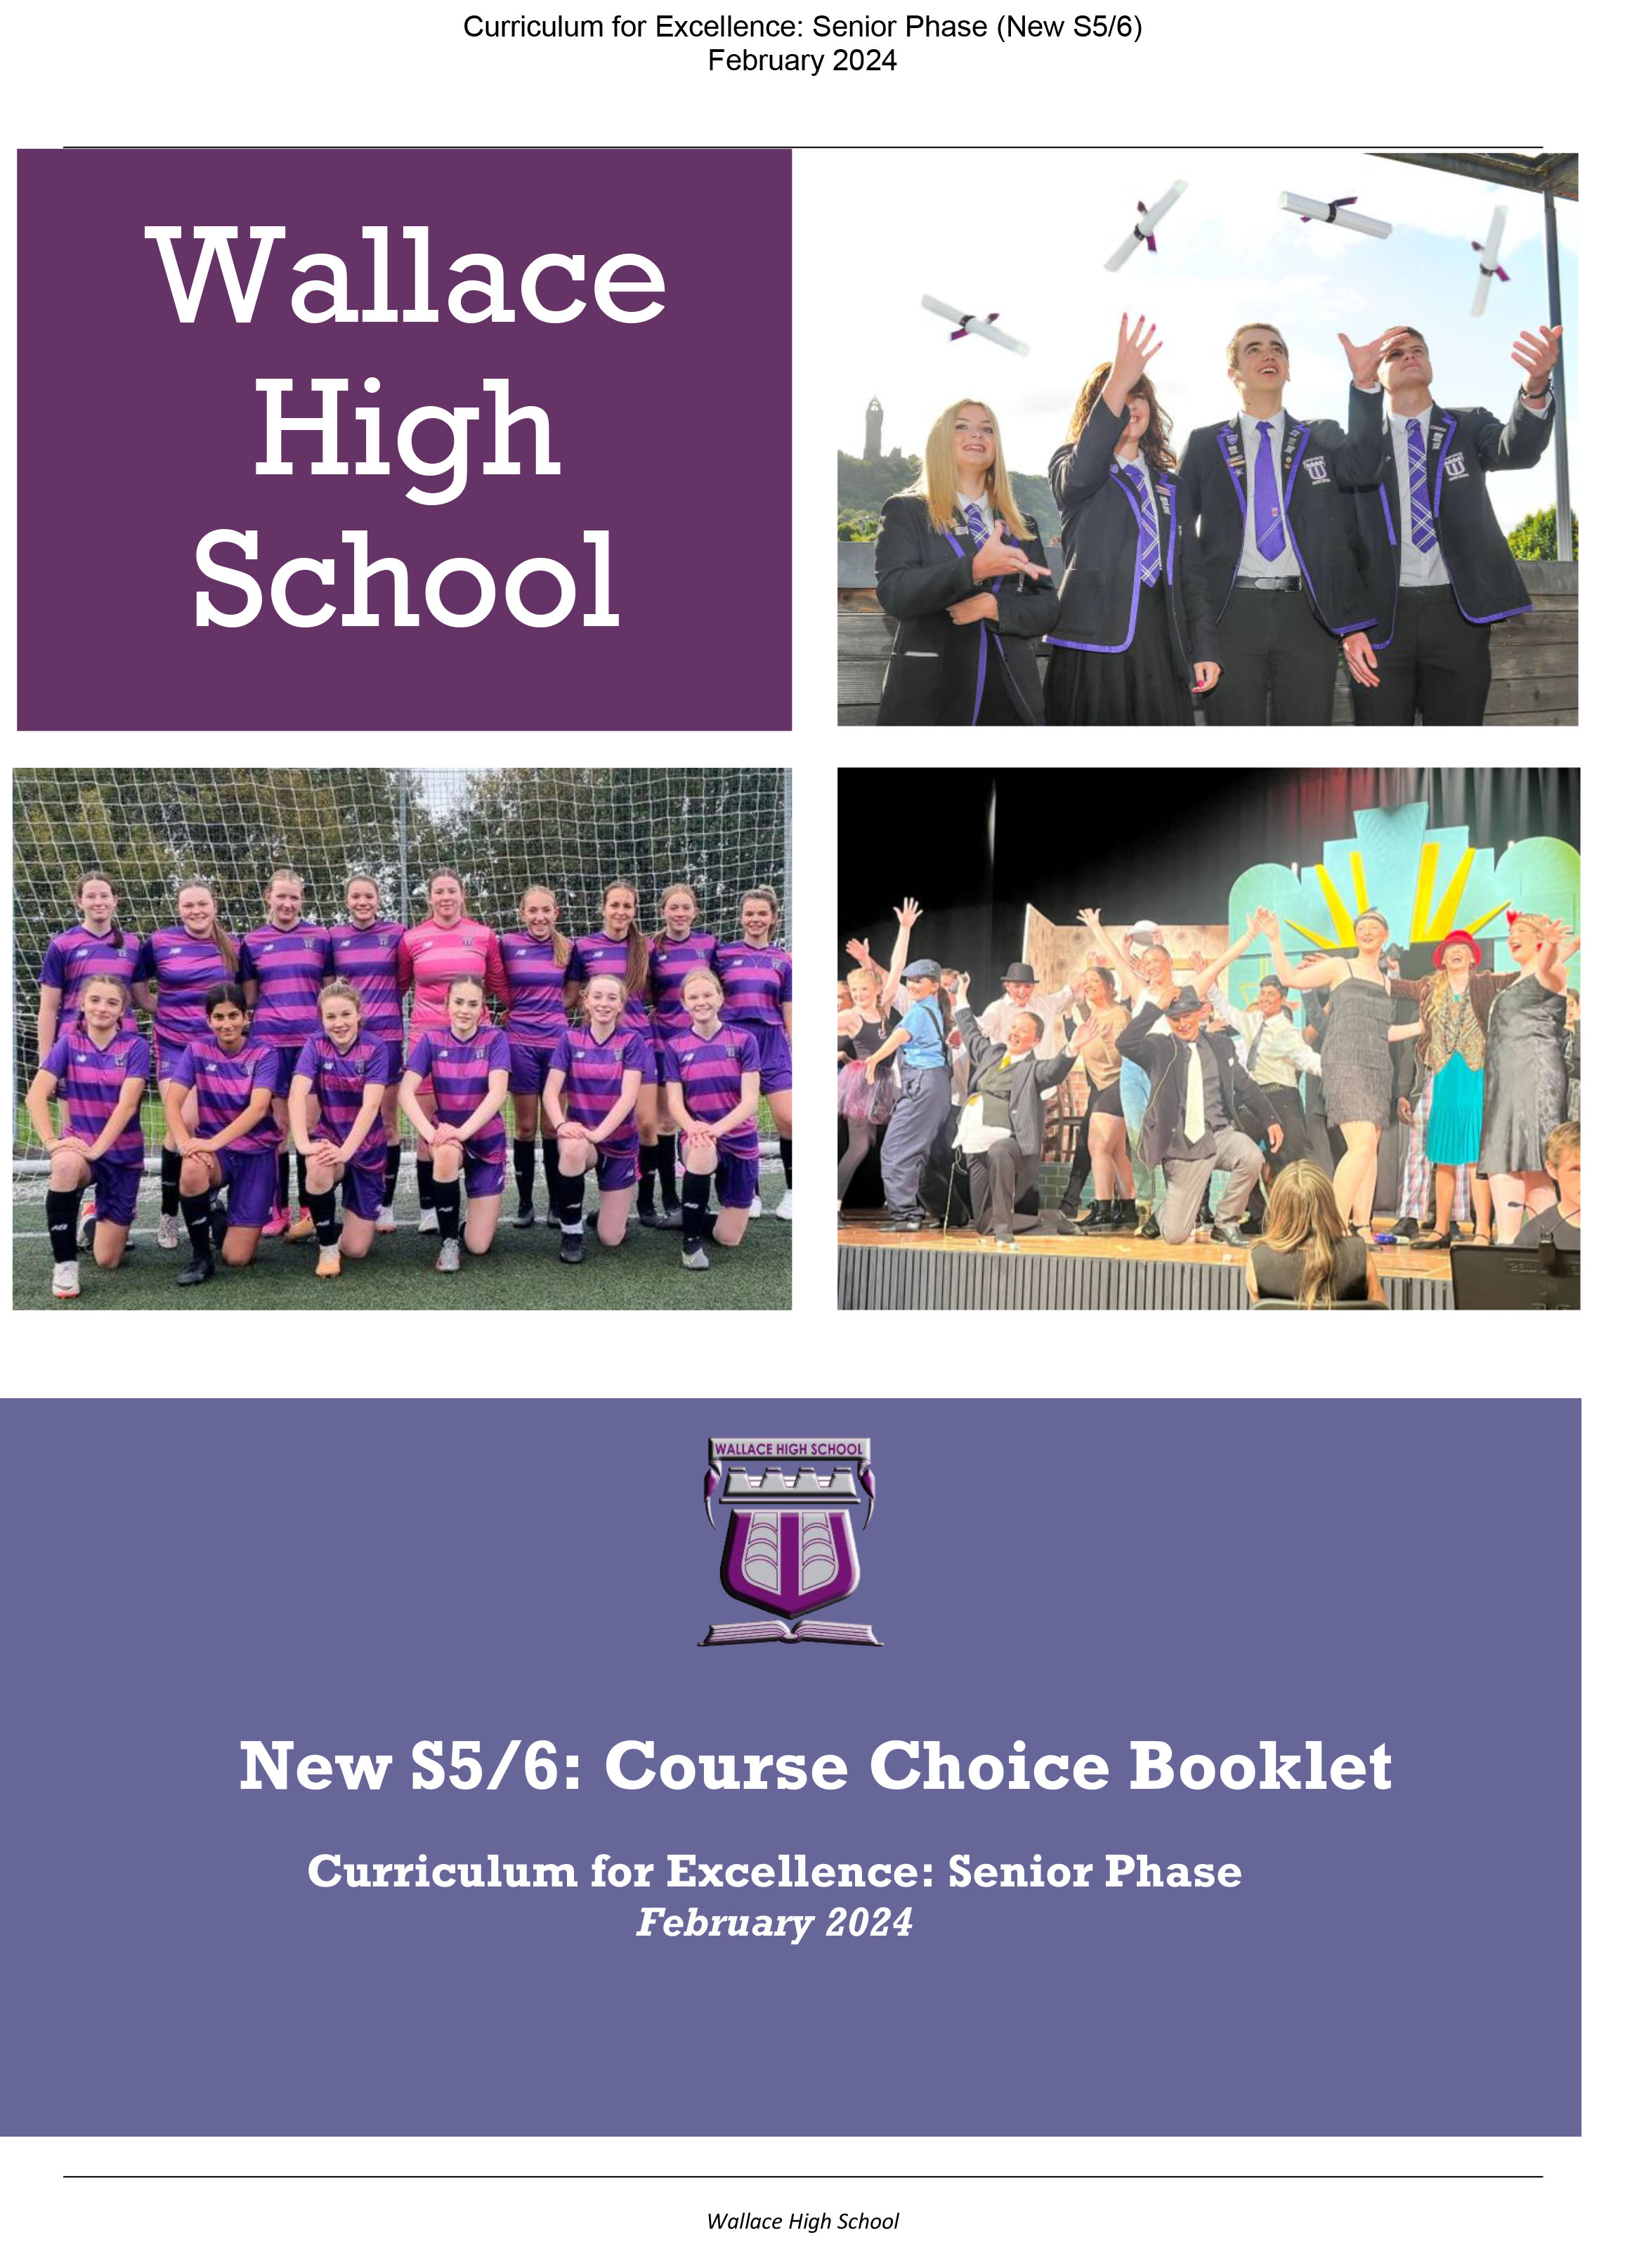 S4 5 New S5 6 Course Choice Booklet 2024 002 1